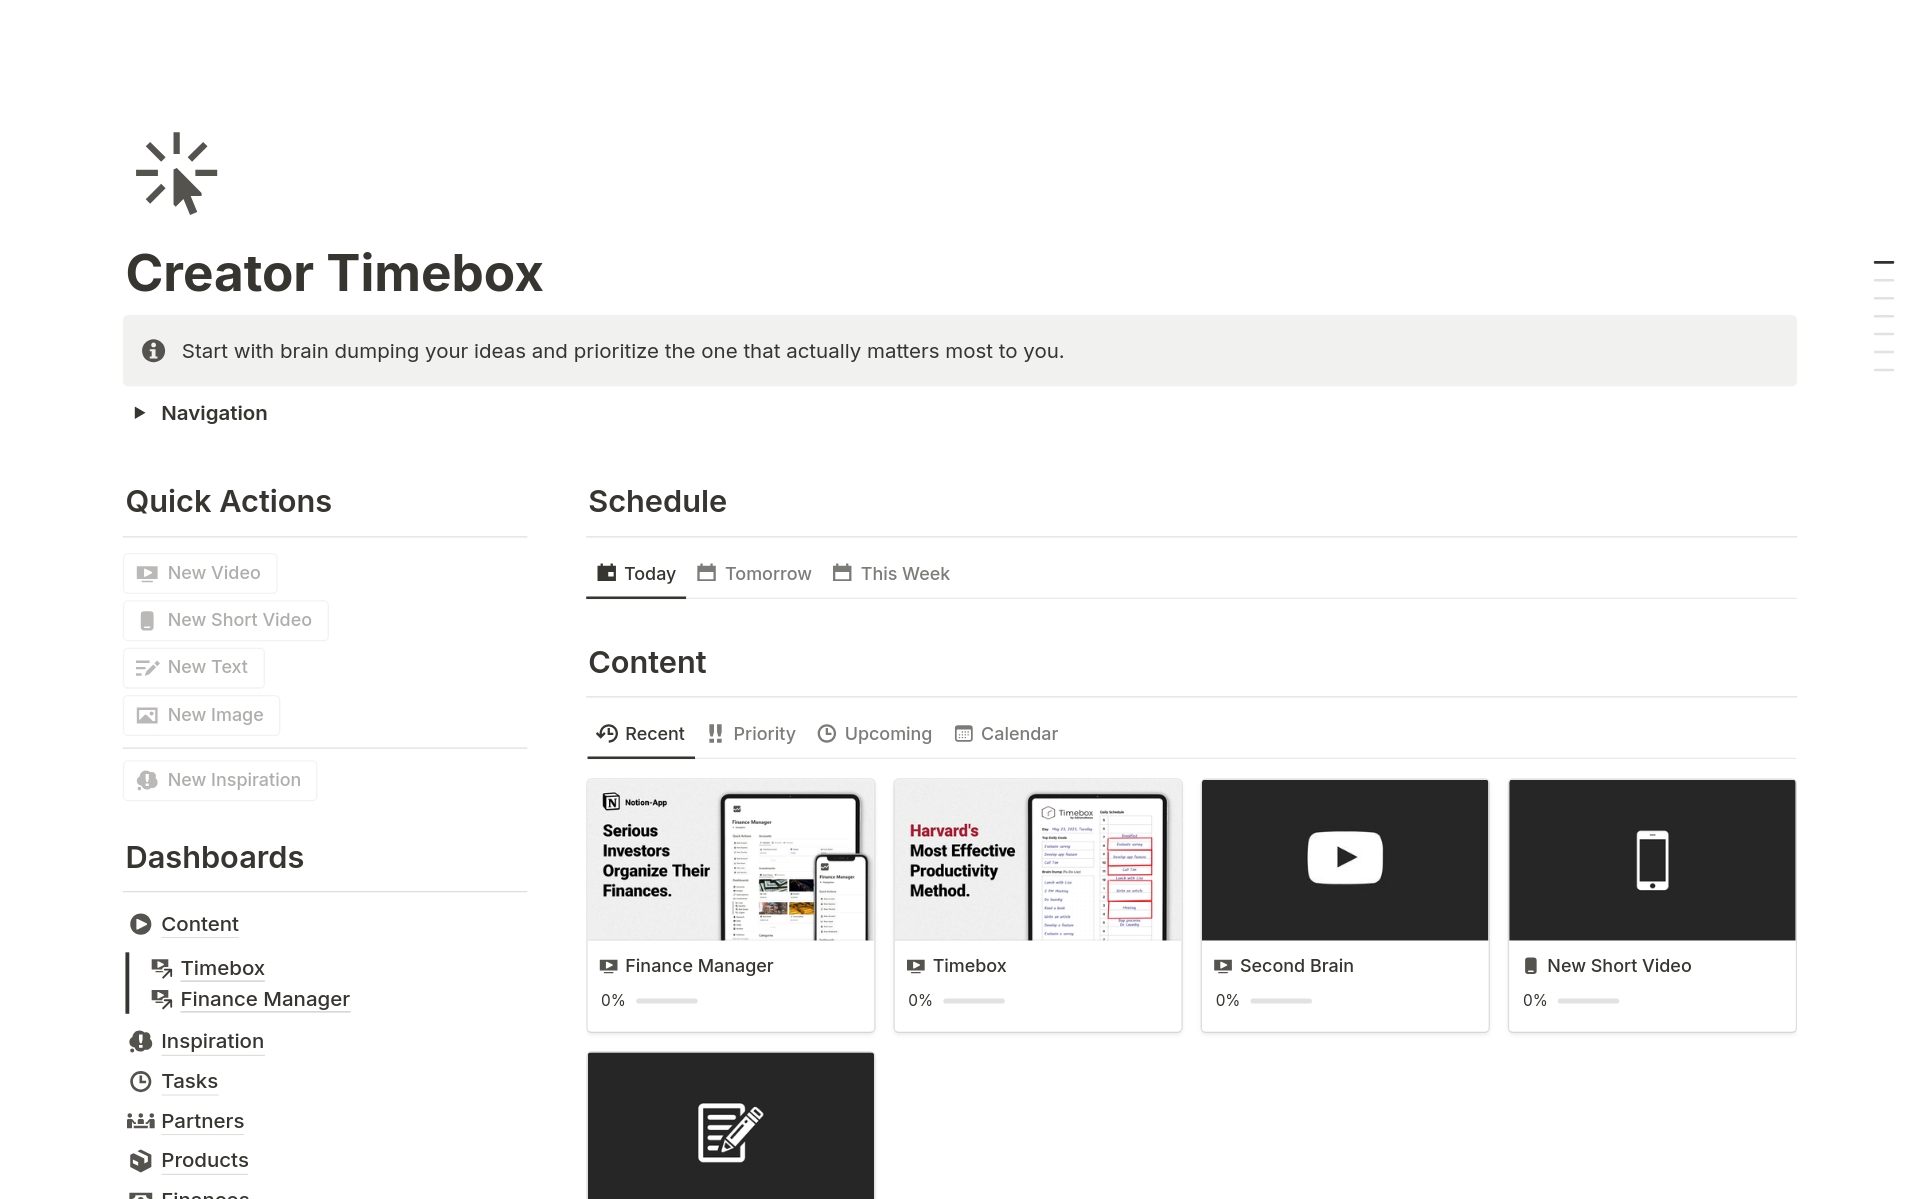 The most sucessful people use Timeboxing to get more done in less time. According to Harvard University, Timeboxing is the most effective productivity method. The Creator Timebox will streamline your workflow and enhance your creative productivity.